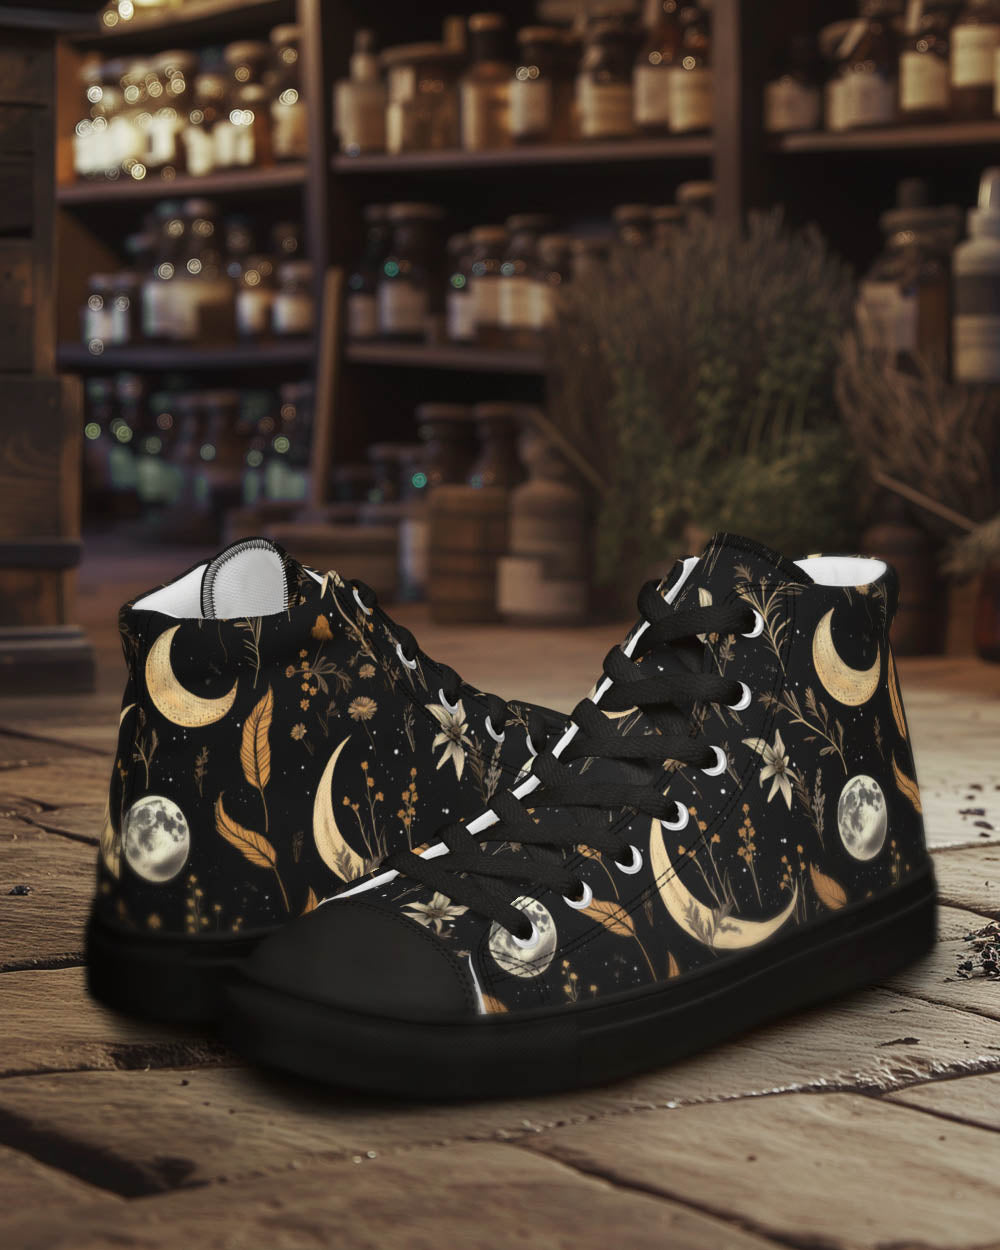 Moonlit Botanica Women’s High Top Shoes - Botanical Vegan Sneakers - Comfortable Goth Trainers - Witchy Grunge Alt Fashion Leisurewear